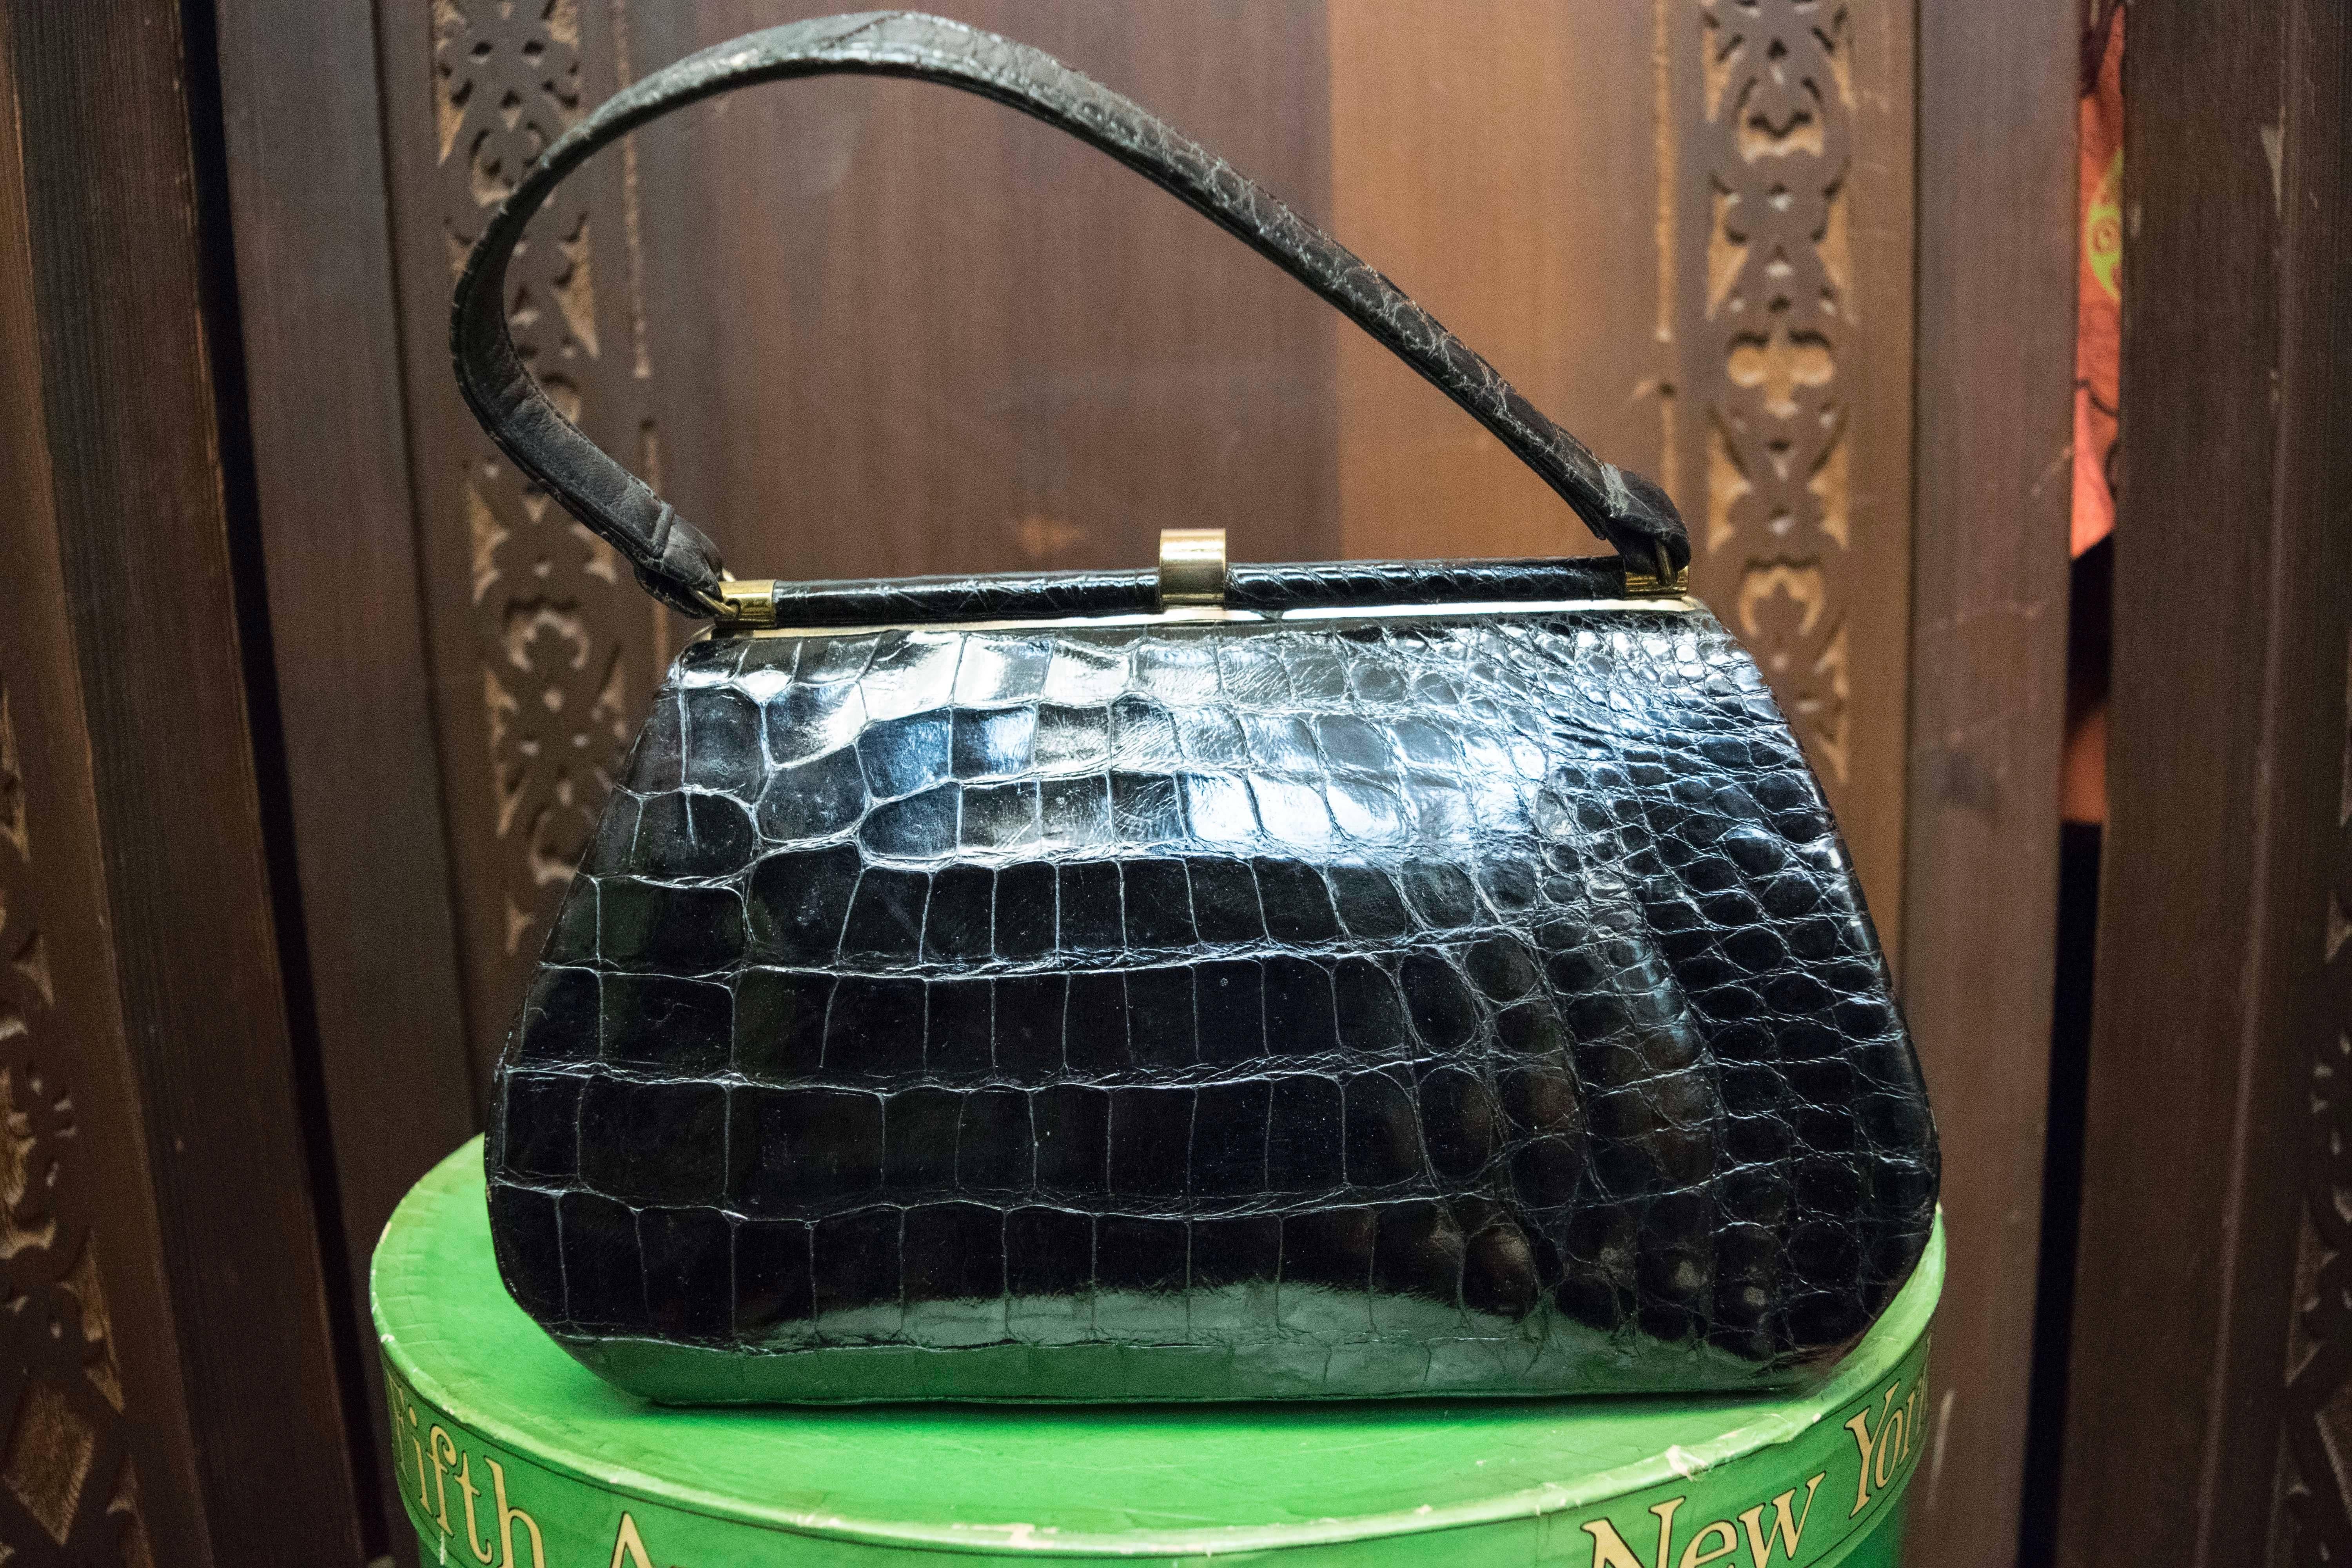 1950s Bellestones Black Alligator Handbag

This bag is lined in red leather and comes with original compact and coin purse.

L 10.5
H 6.5
D 3.5
